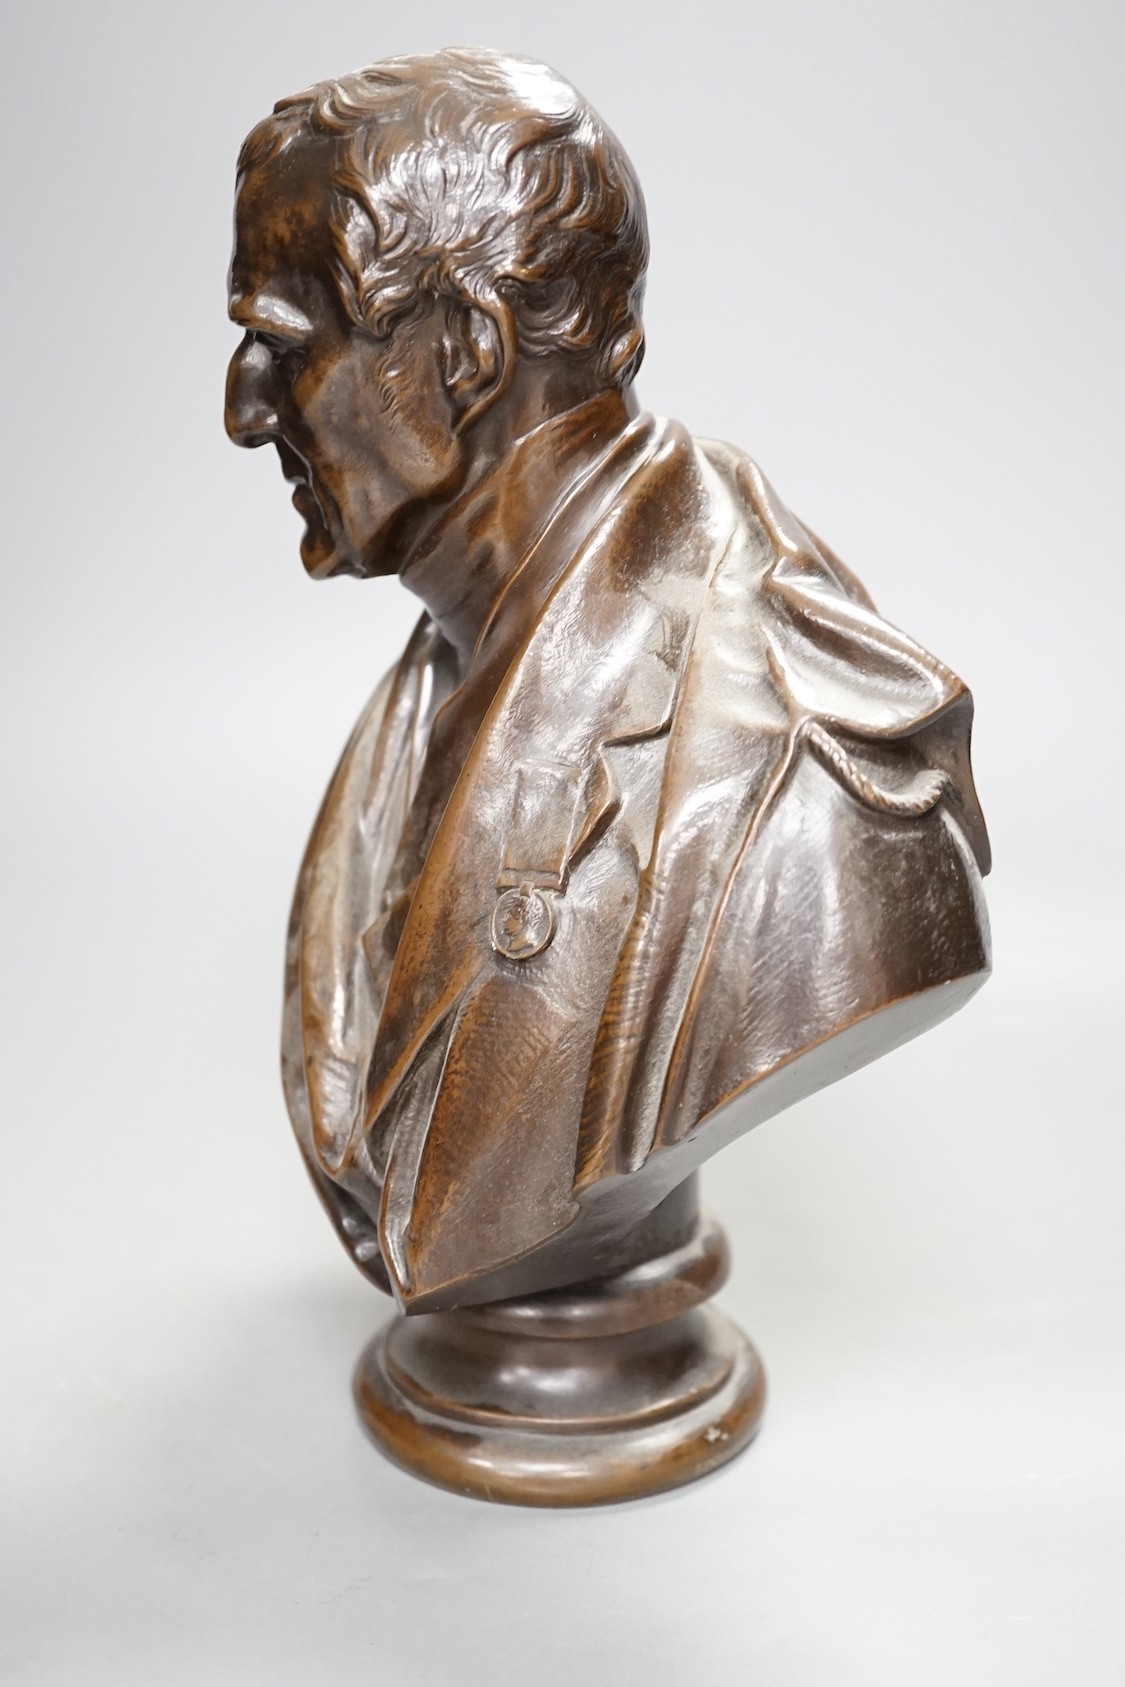 A small bronze bust of Wellington, by Matthew Noble (1817-1876), inscribed verso 'Noble 1852' - 27cm tall